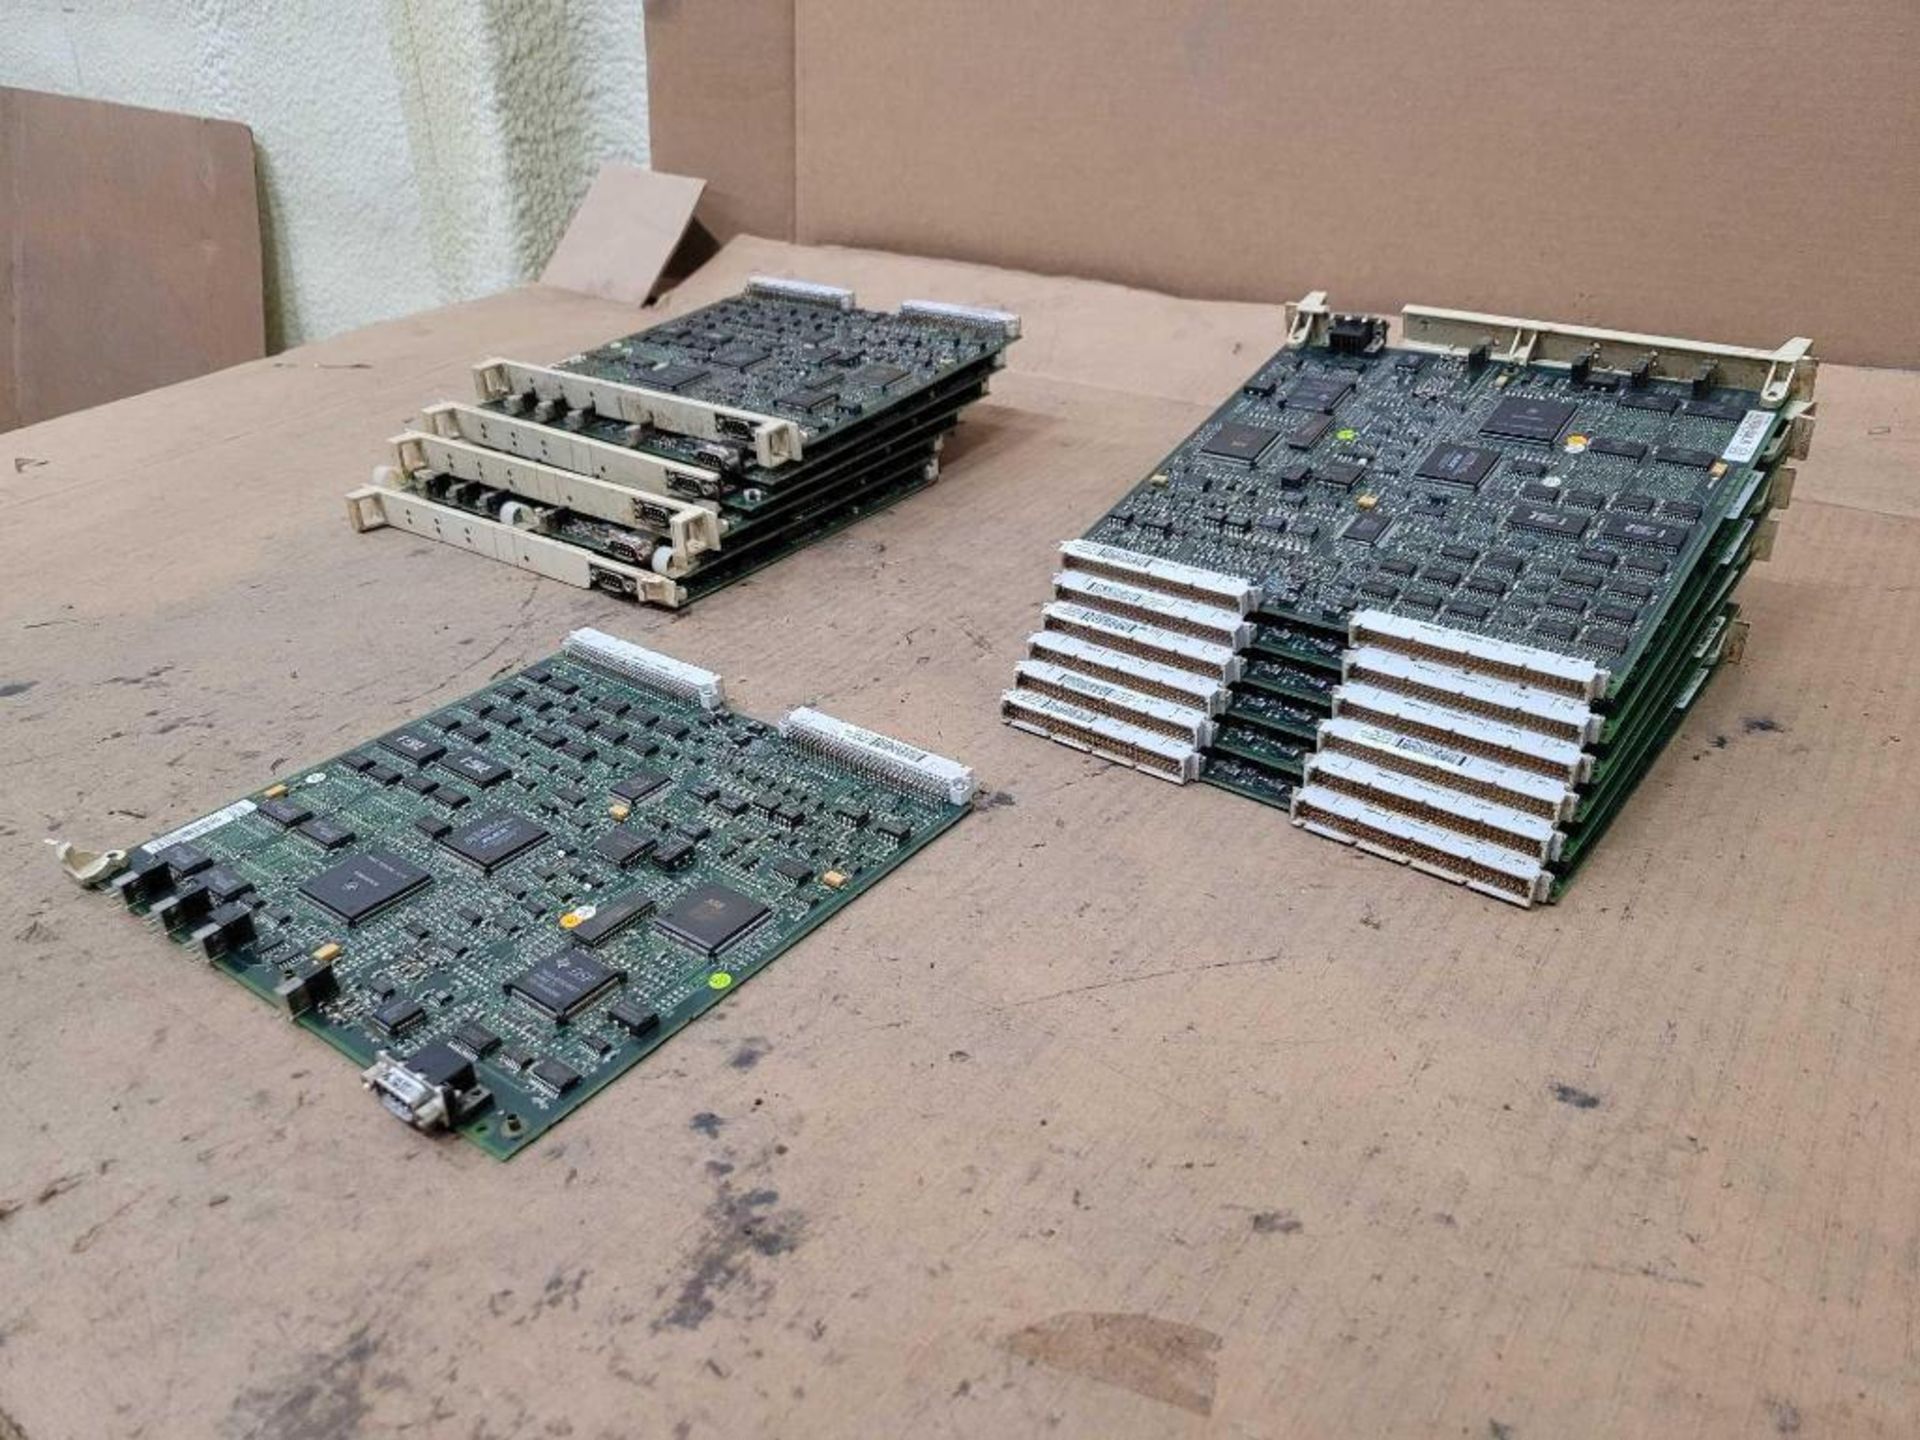 LOT OF 13 ABB 3BSC 980 006 R270 CPU BOARD - Image 3 of 4